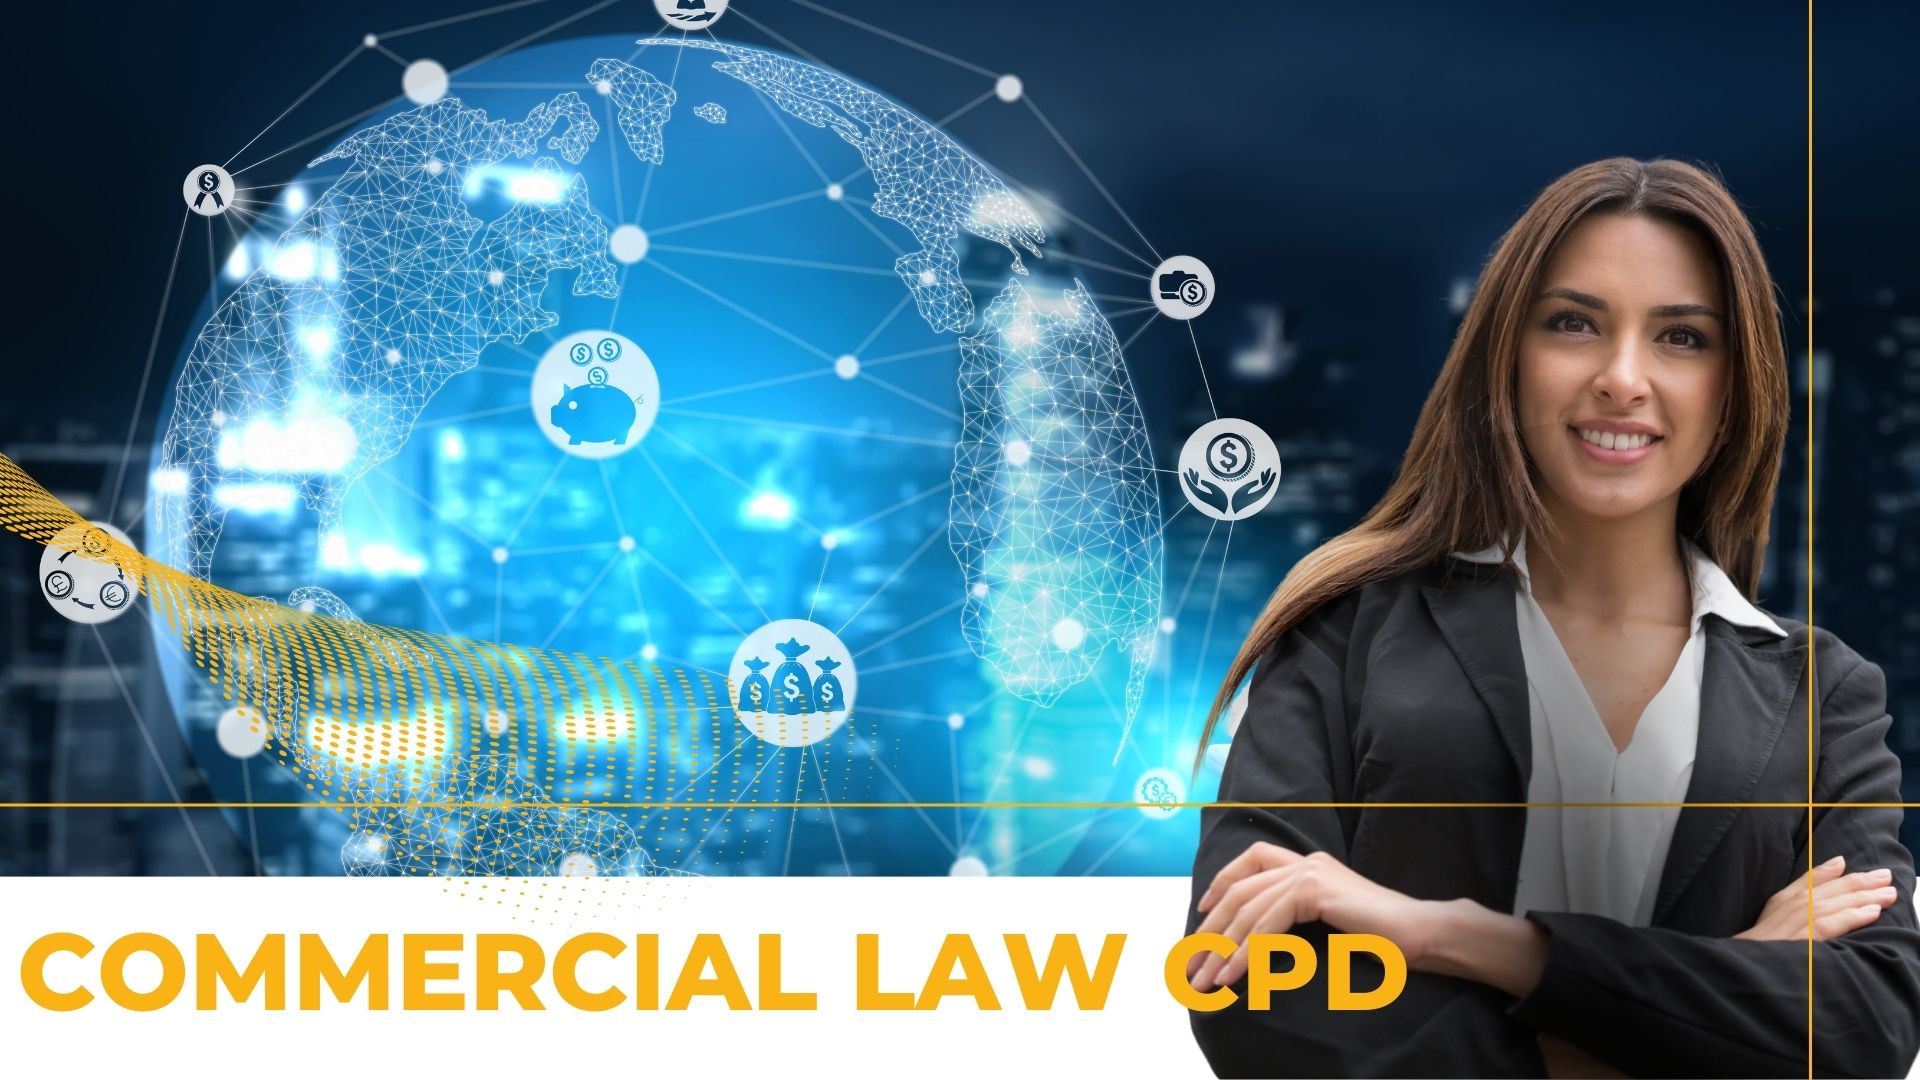 Commercial Law CPD Calendar